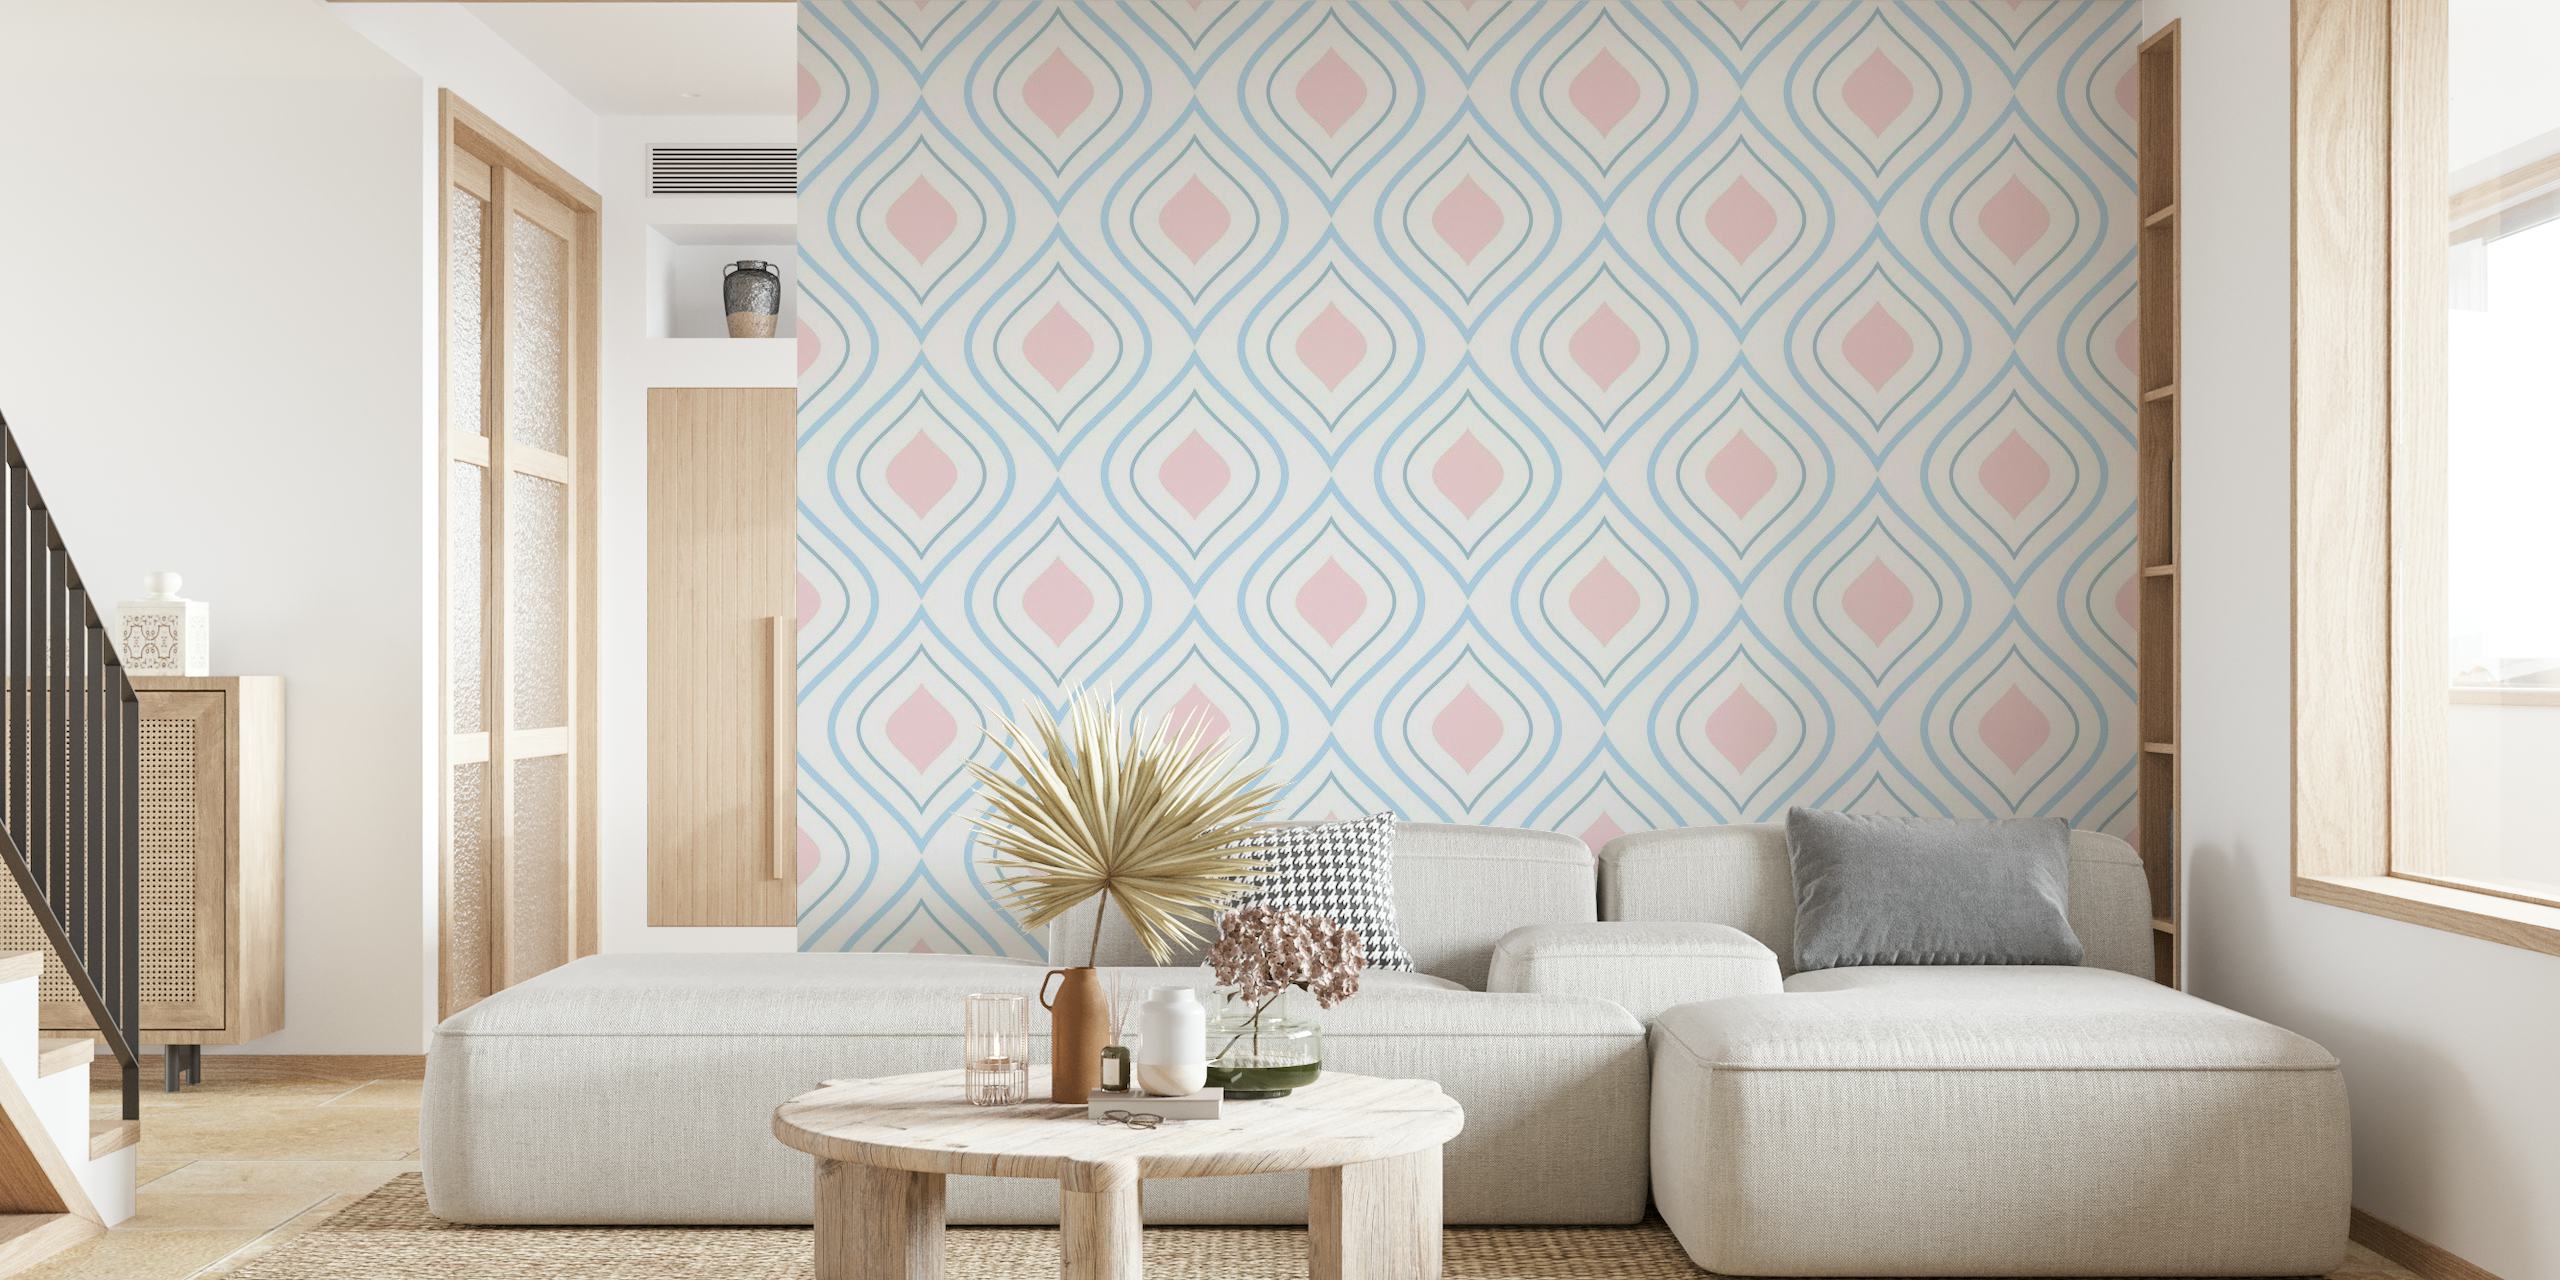 Abstract Geometrical 5 wall mural with pastel hues and geometric shapes